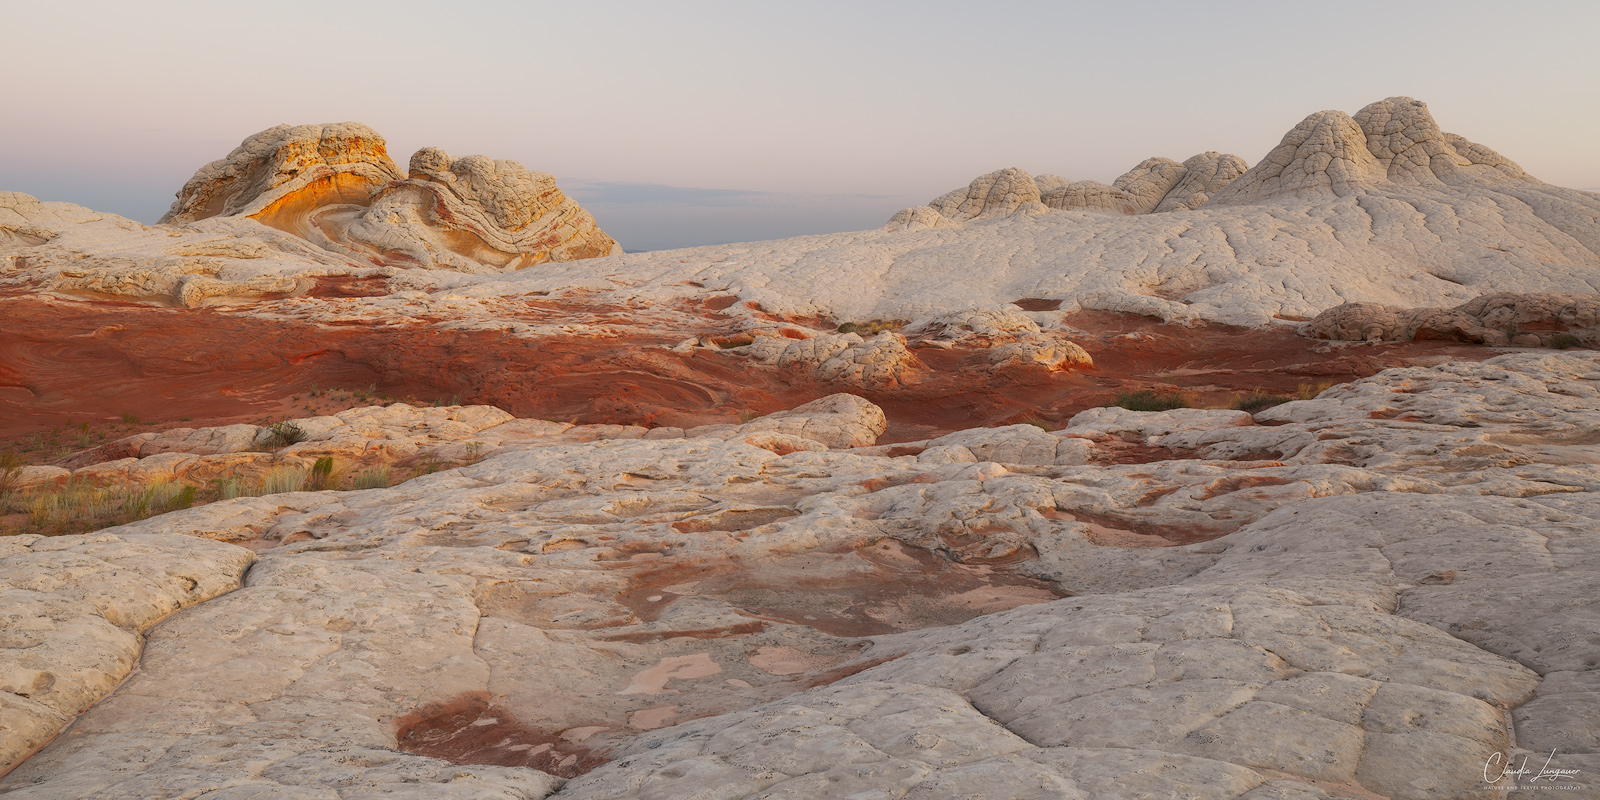 View of rock formations in White Pocket in Arizona at sunrise.